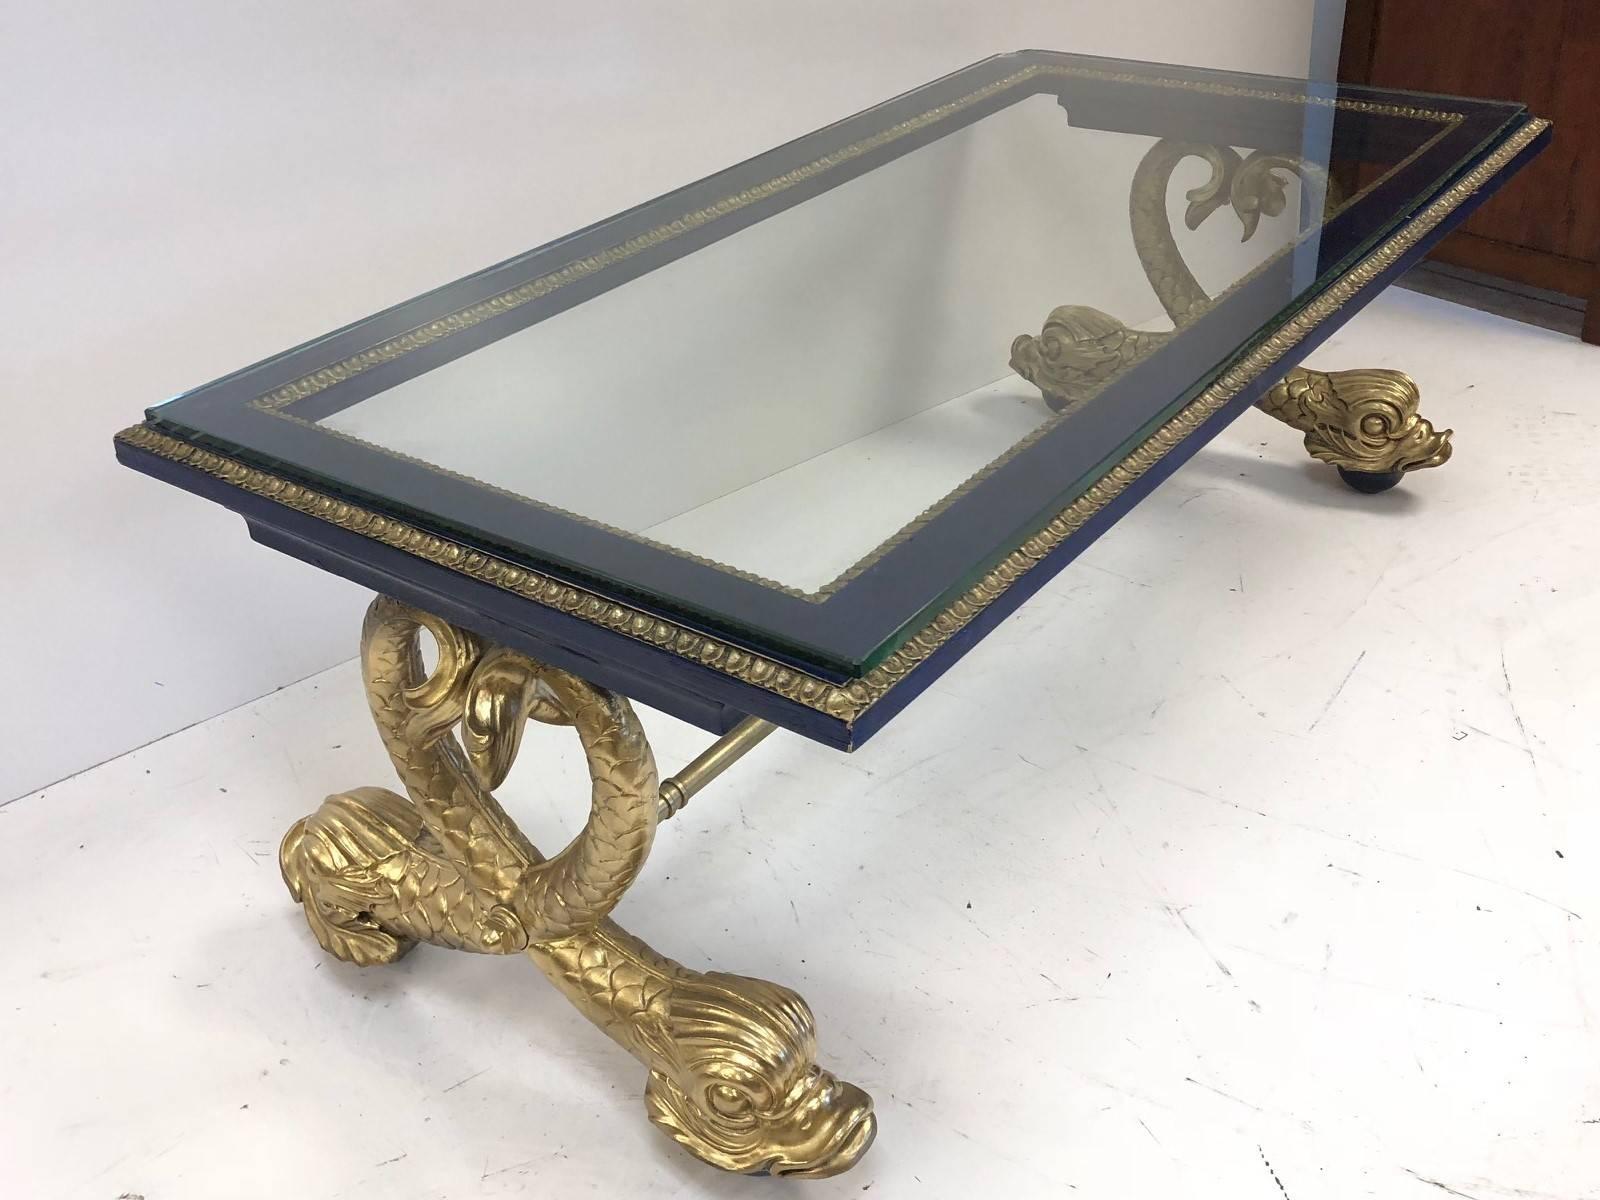 Neoclassical style carved wood dolphin coffee table. Top of the table is painted blue and the ball feet are painted blue as well. The dolphins are carved wood and the stretcher is solid brass. Nice sized glass top.